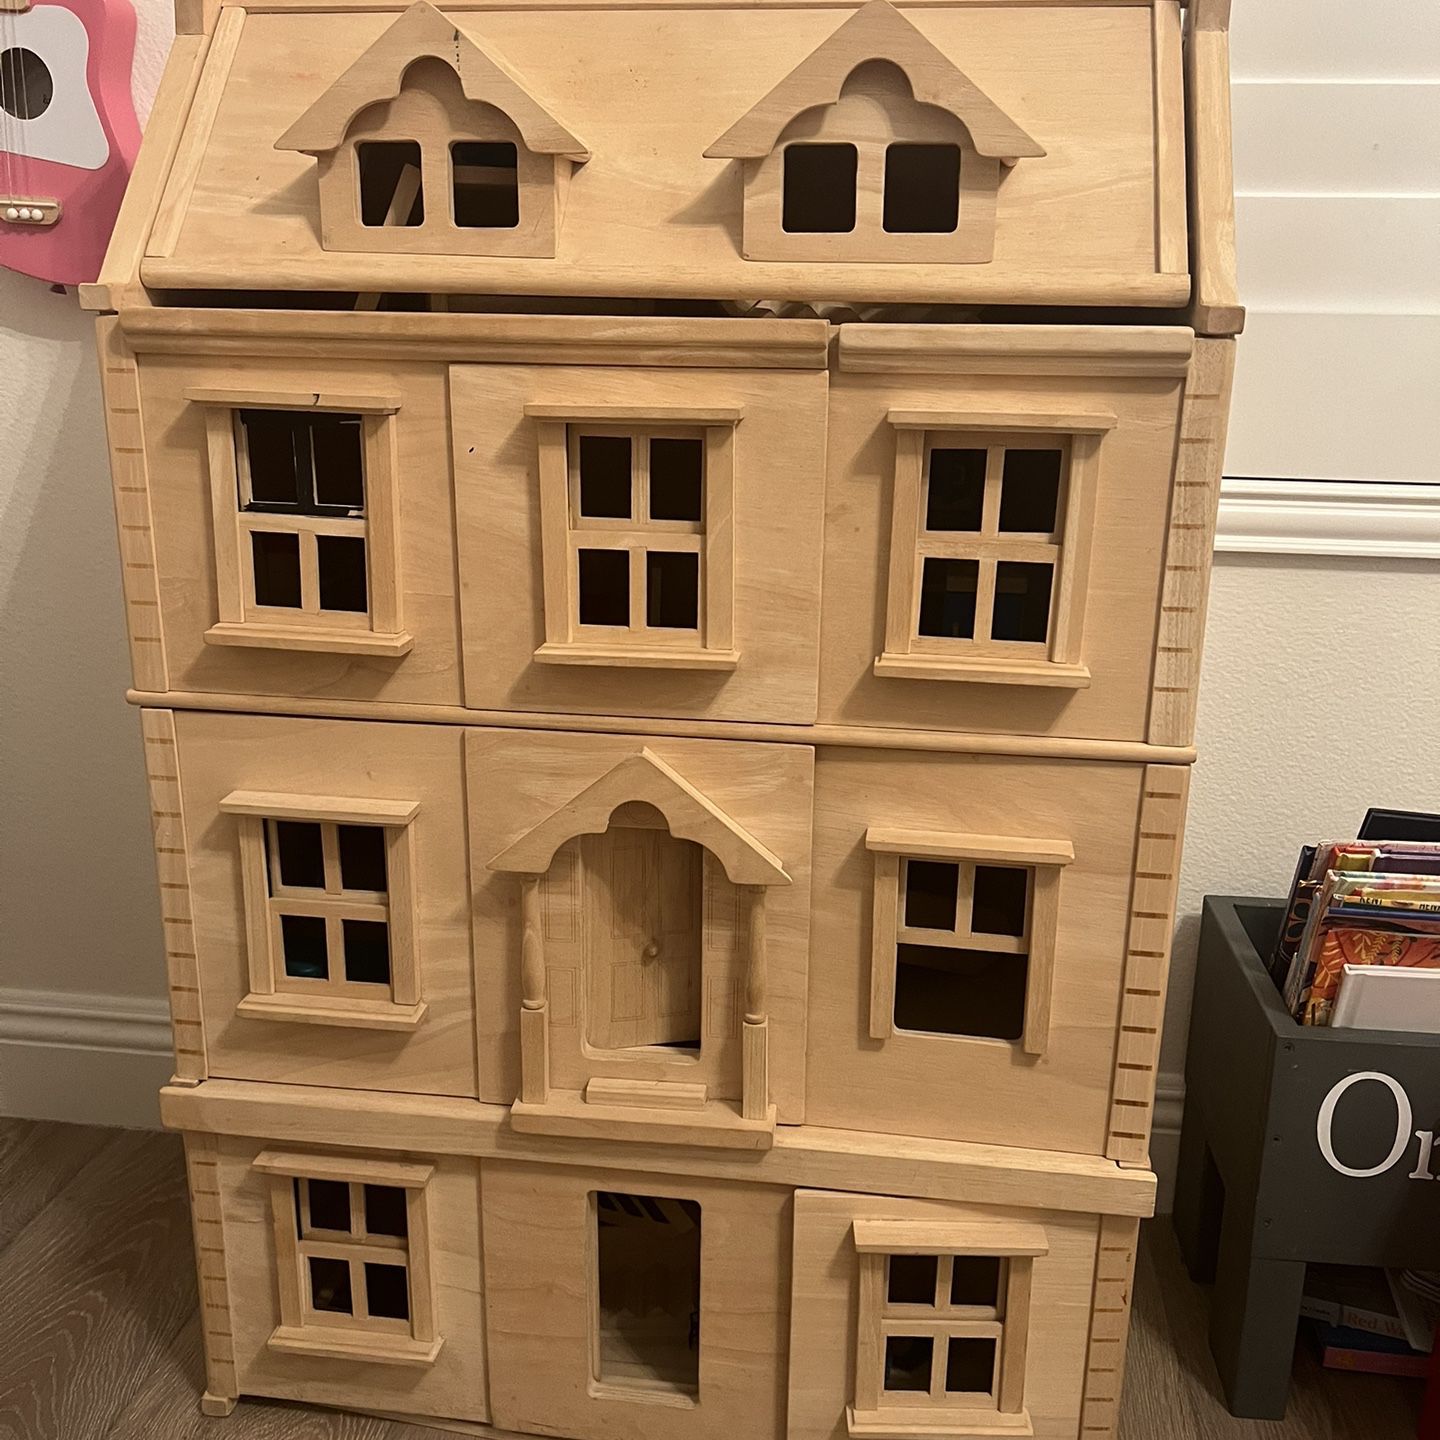 Plan Toys Victorian Doll House